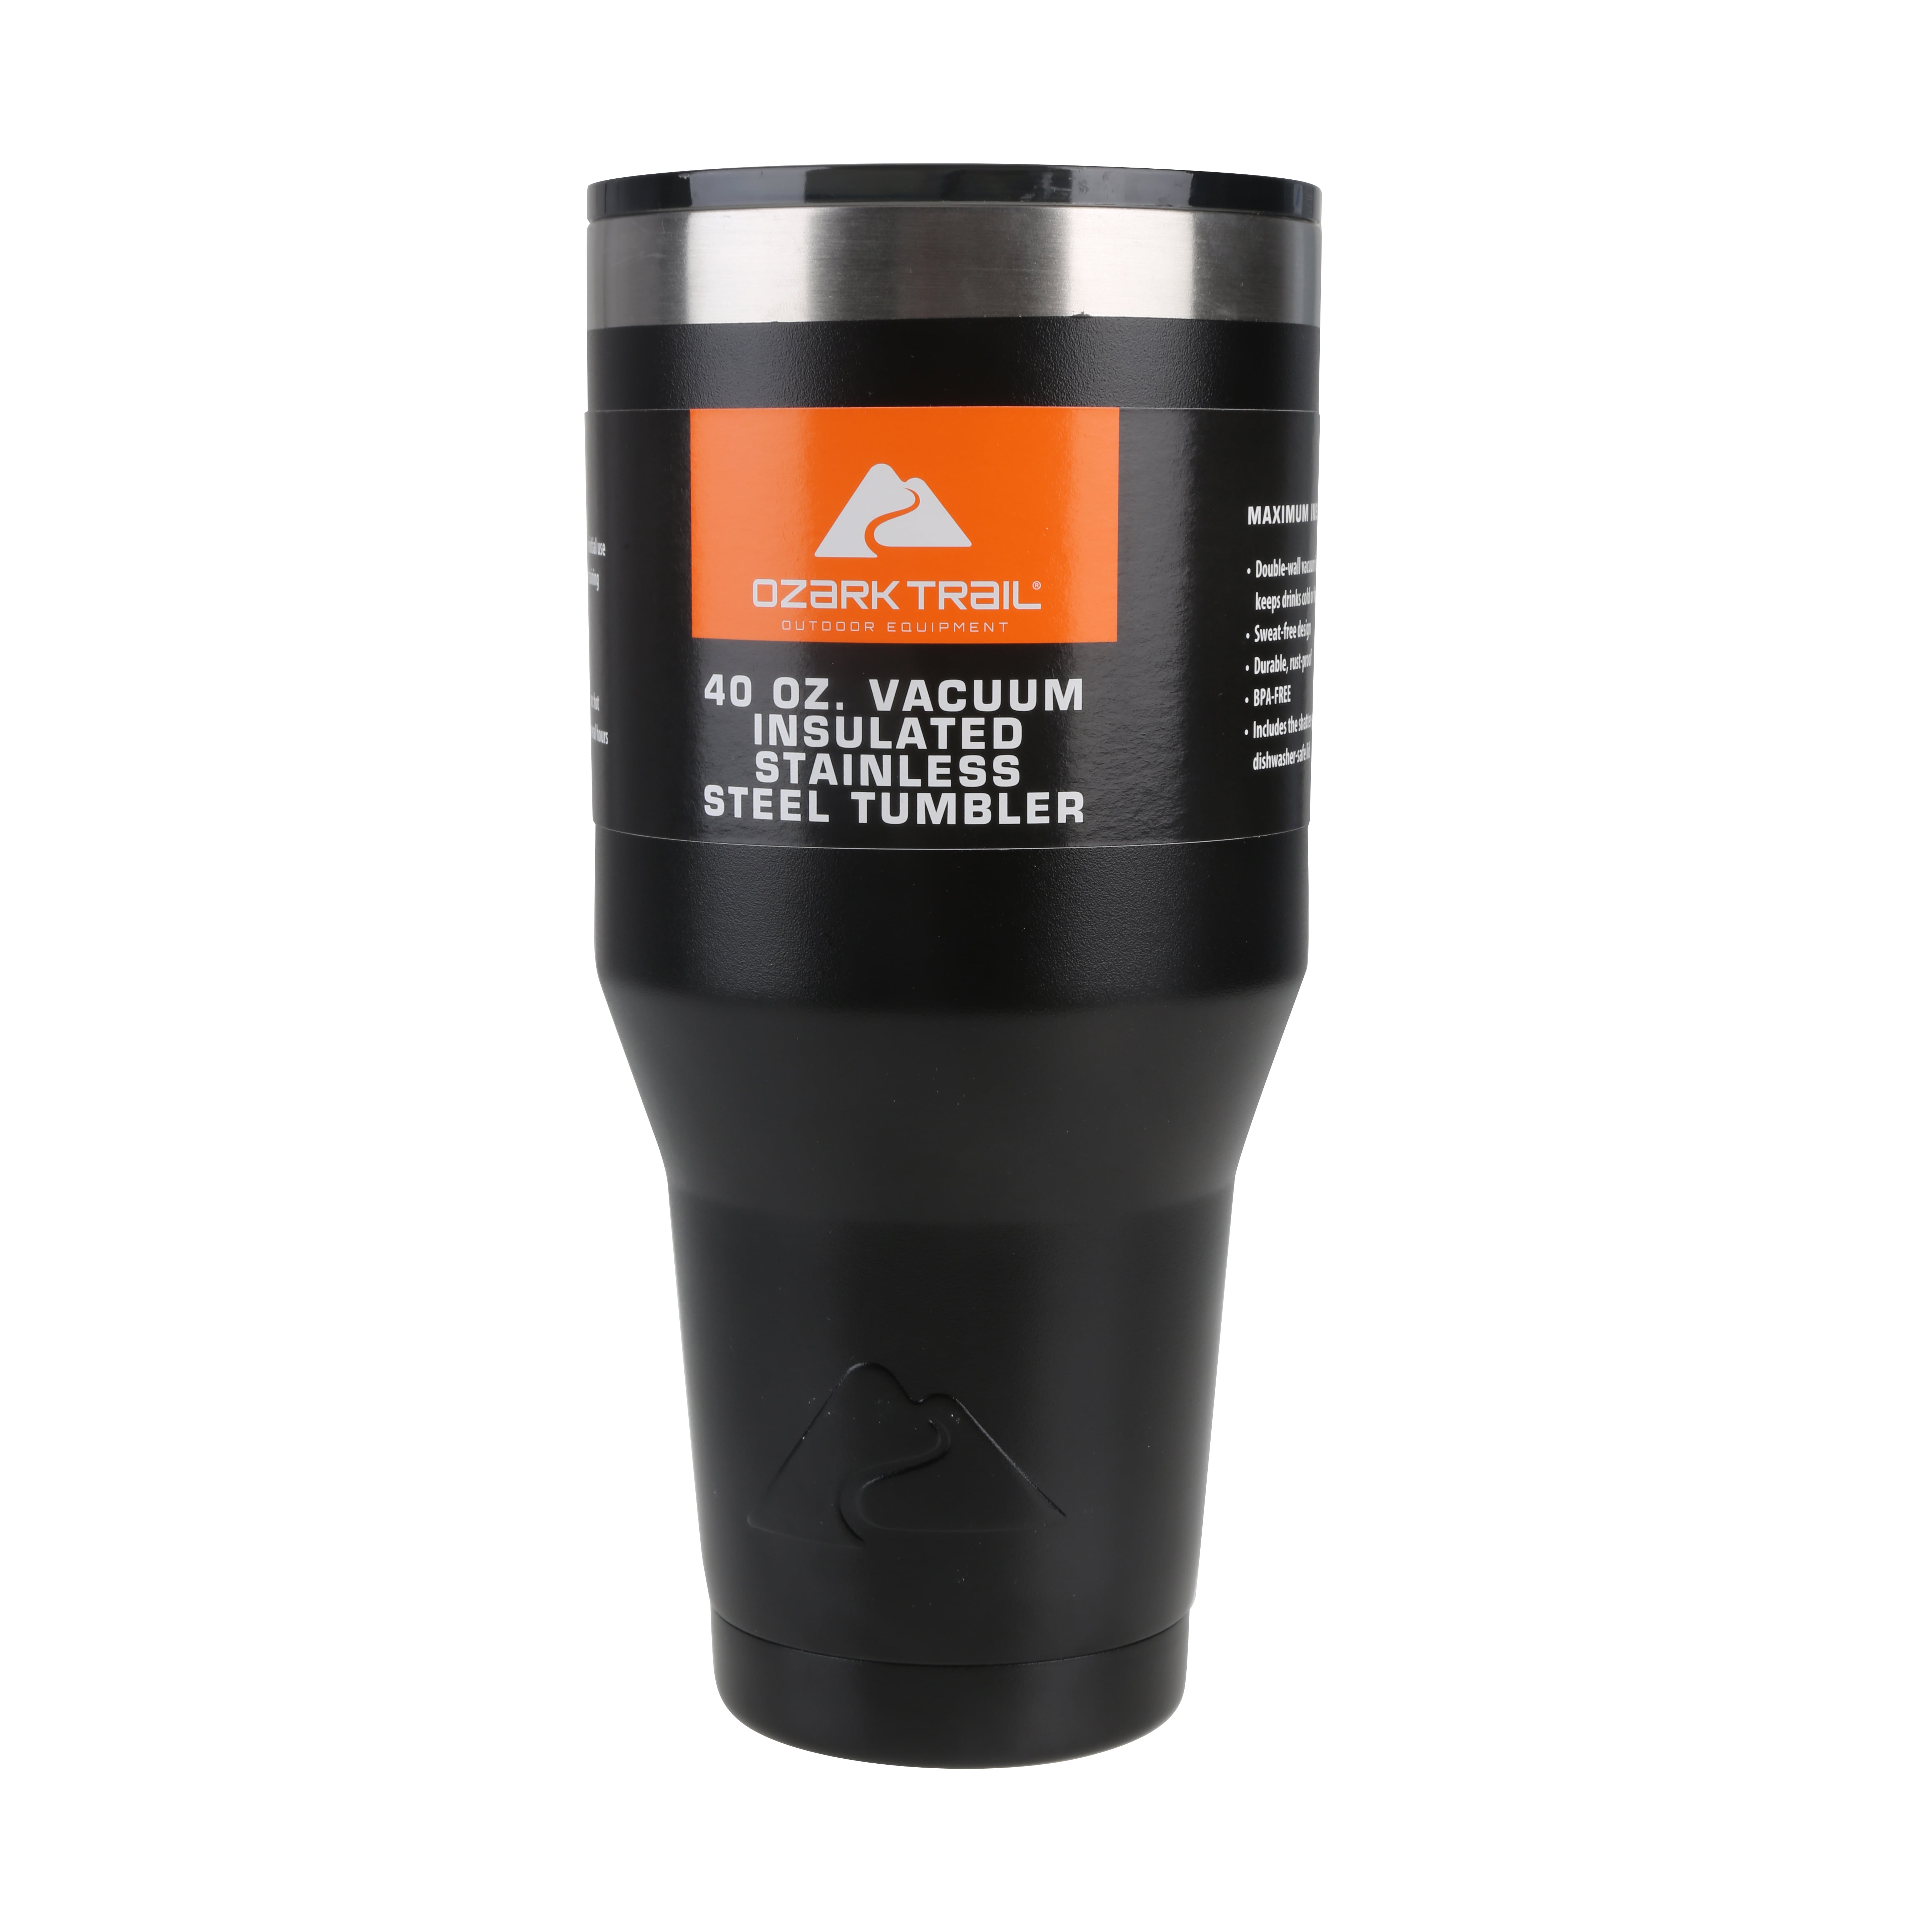 Ozark Trail 40 oz Vacuum Insulated Stainless Steel Tumbler Rose Gold